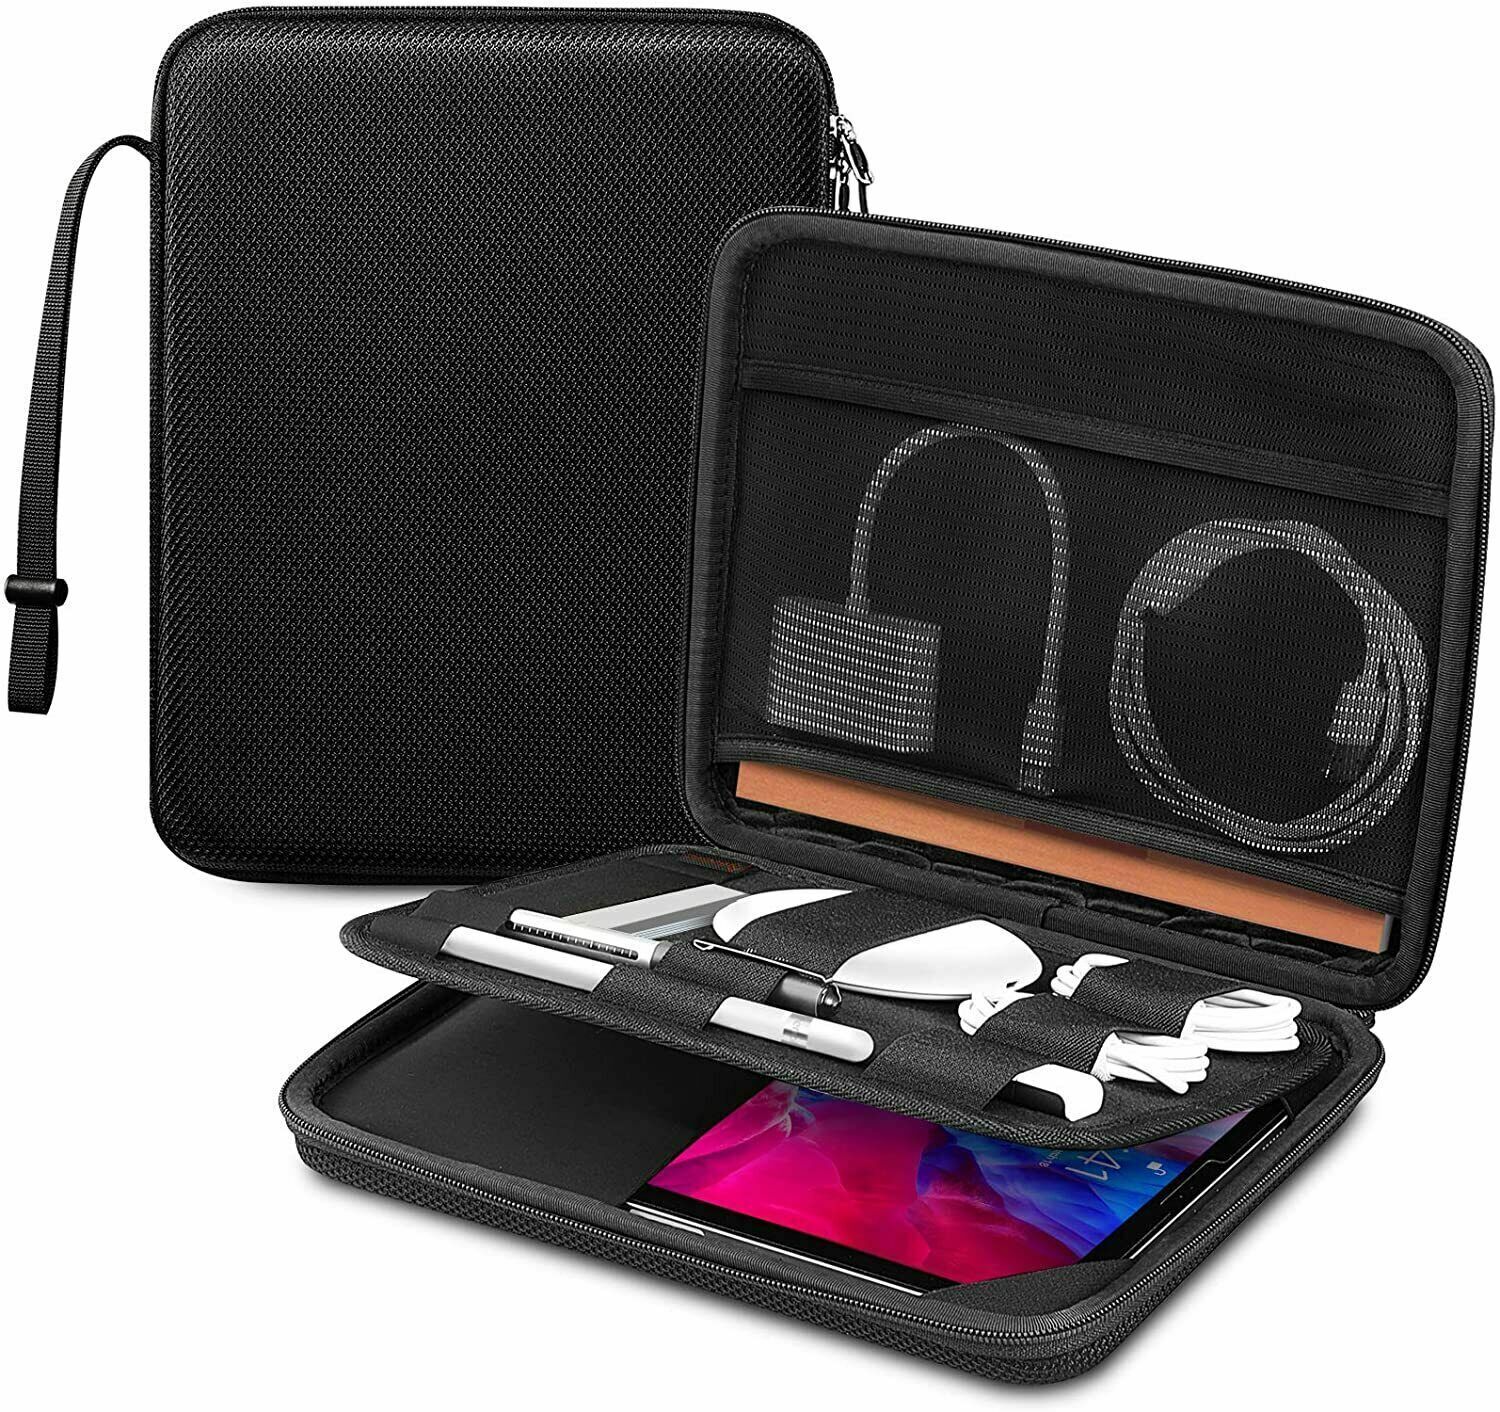 Sleeve Case for Apple iPad Semi-Hard Accessories Organizer Storage Carrying Case